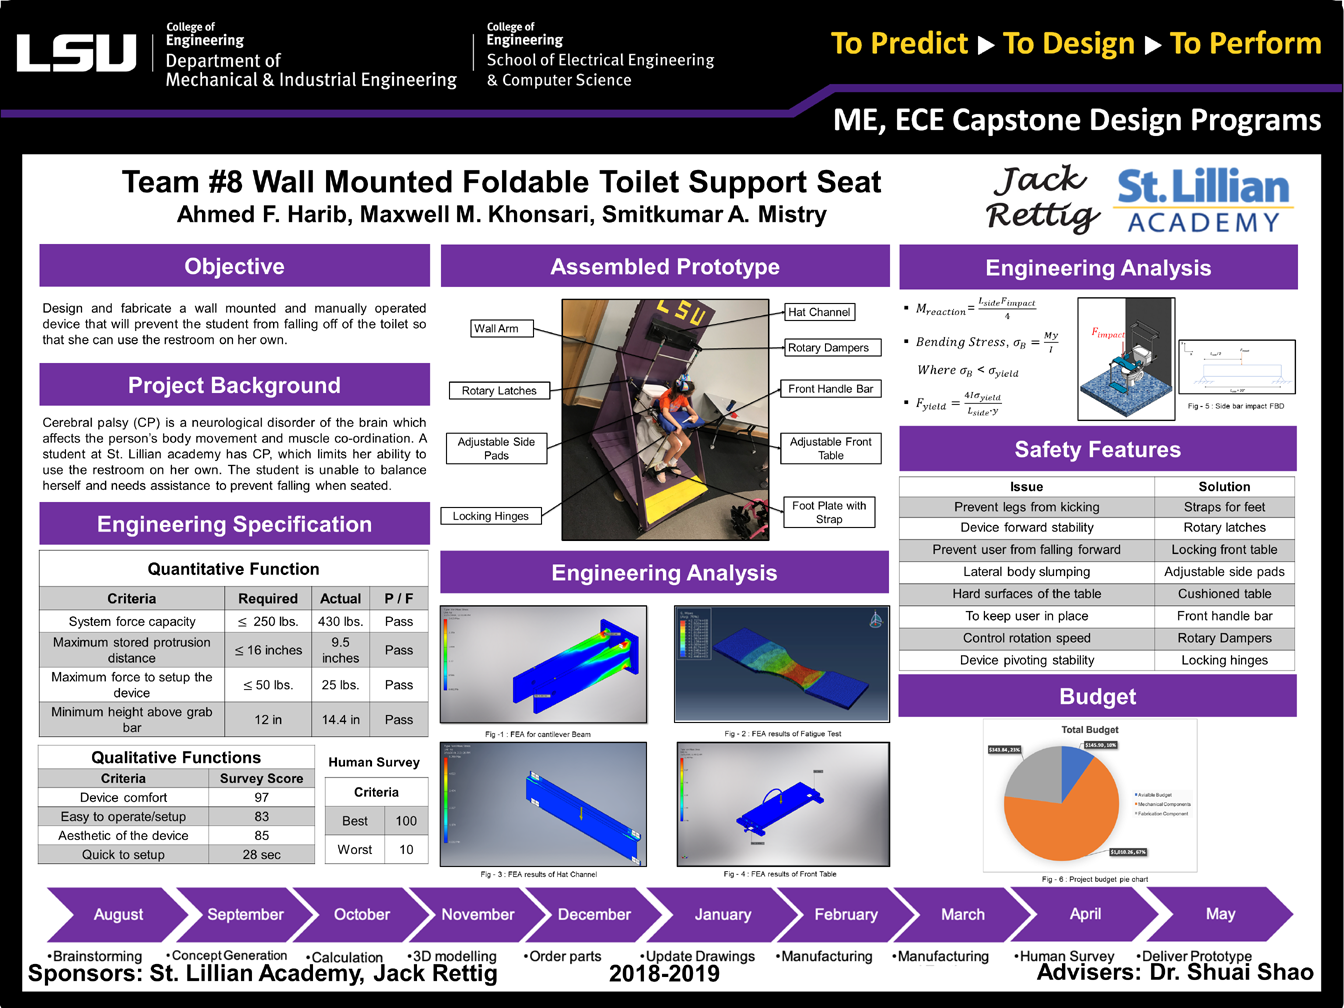 Project 8: wall mounted foldable toilet support seat (2019)